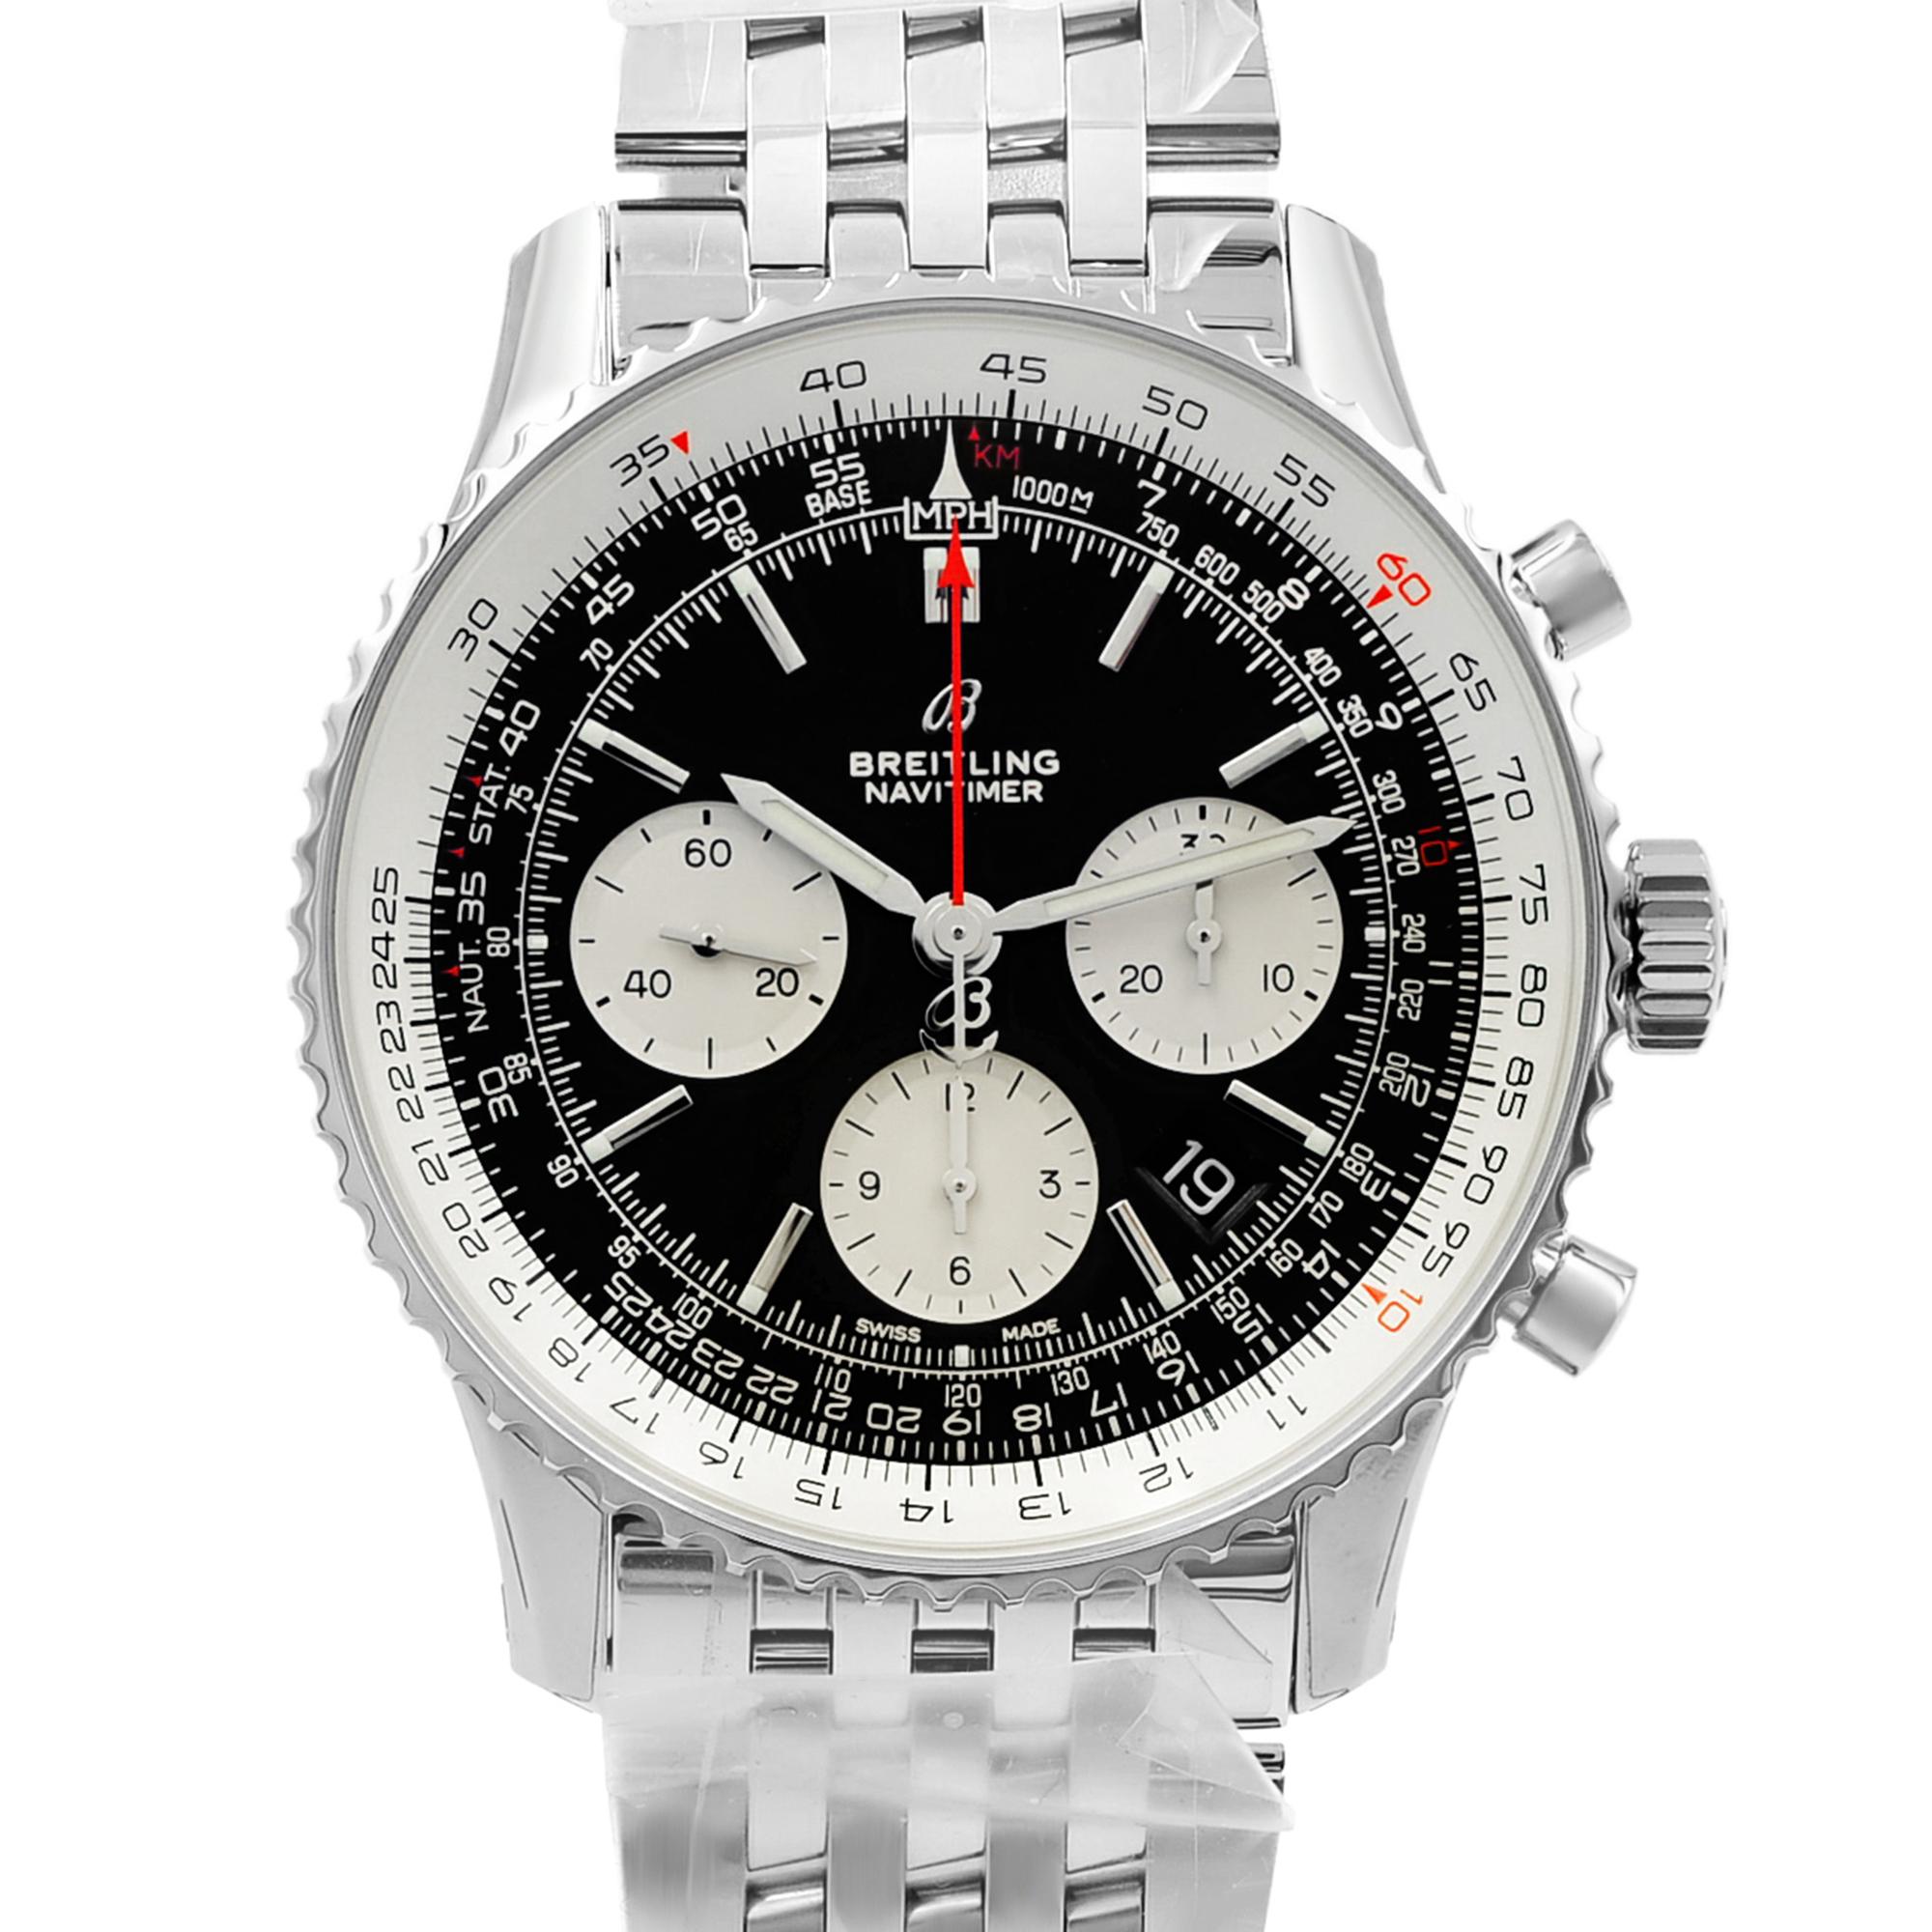 This  never been worn  Breitling Navitimer 1 AB012121/B1A1-450A is a beautiful men's timepiece that is powered by mechanical (automatic) movement which is cased in a stainless steel case. It has a round shape face, chronograph, date indicator, small